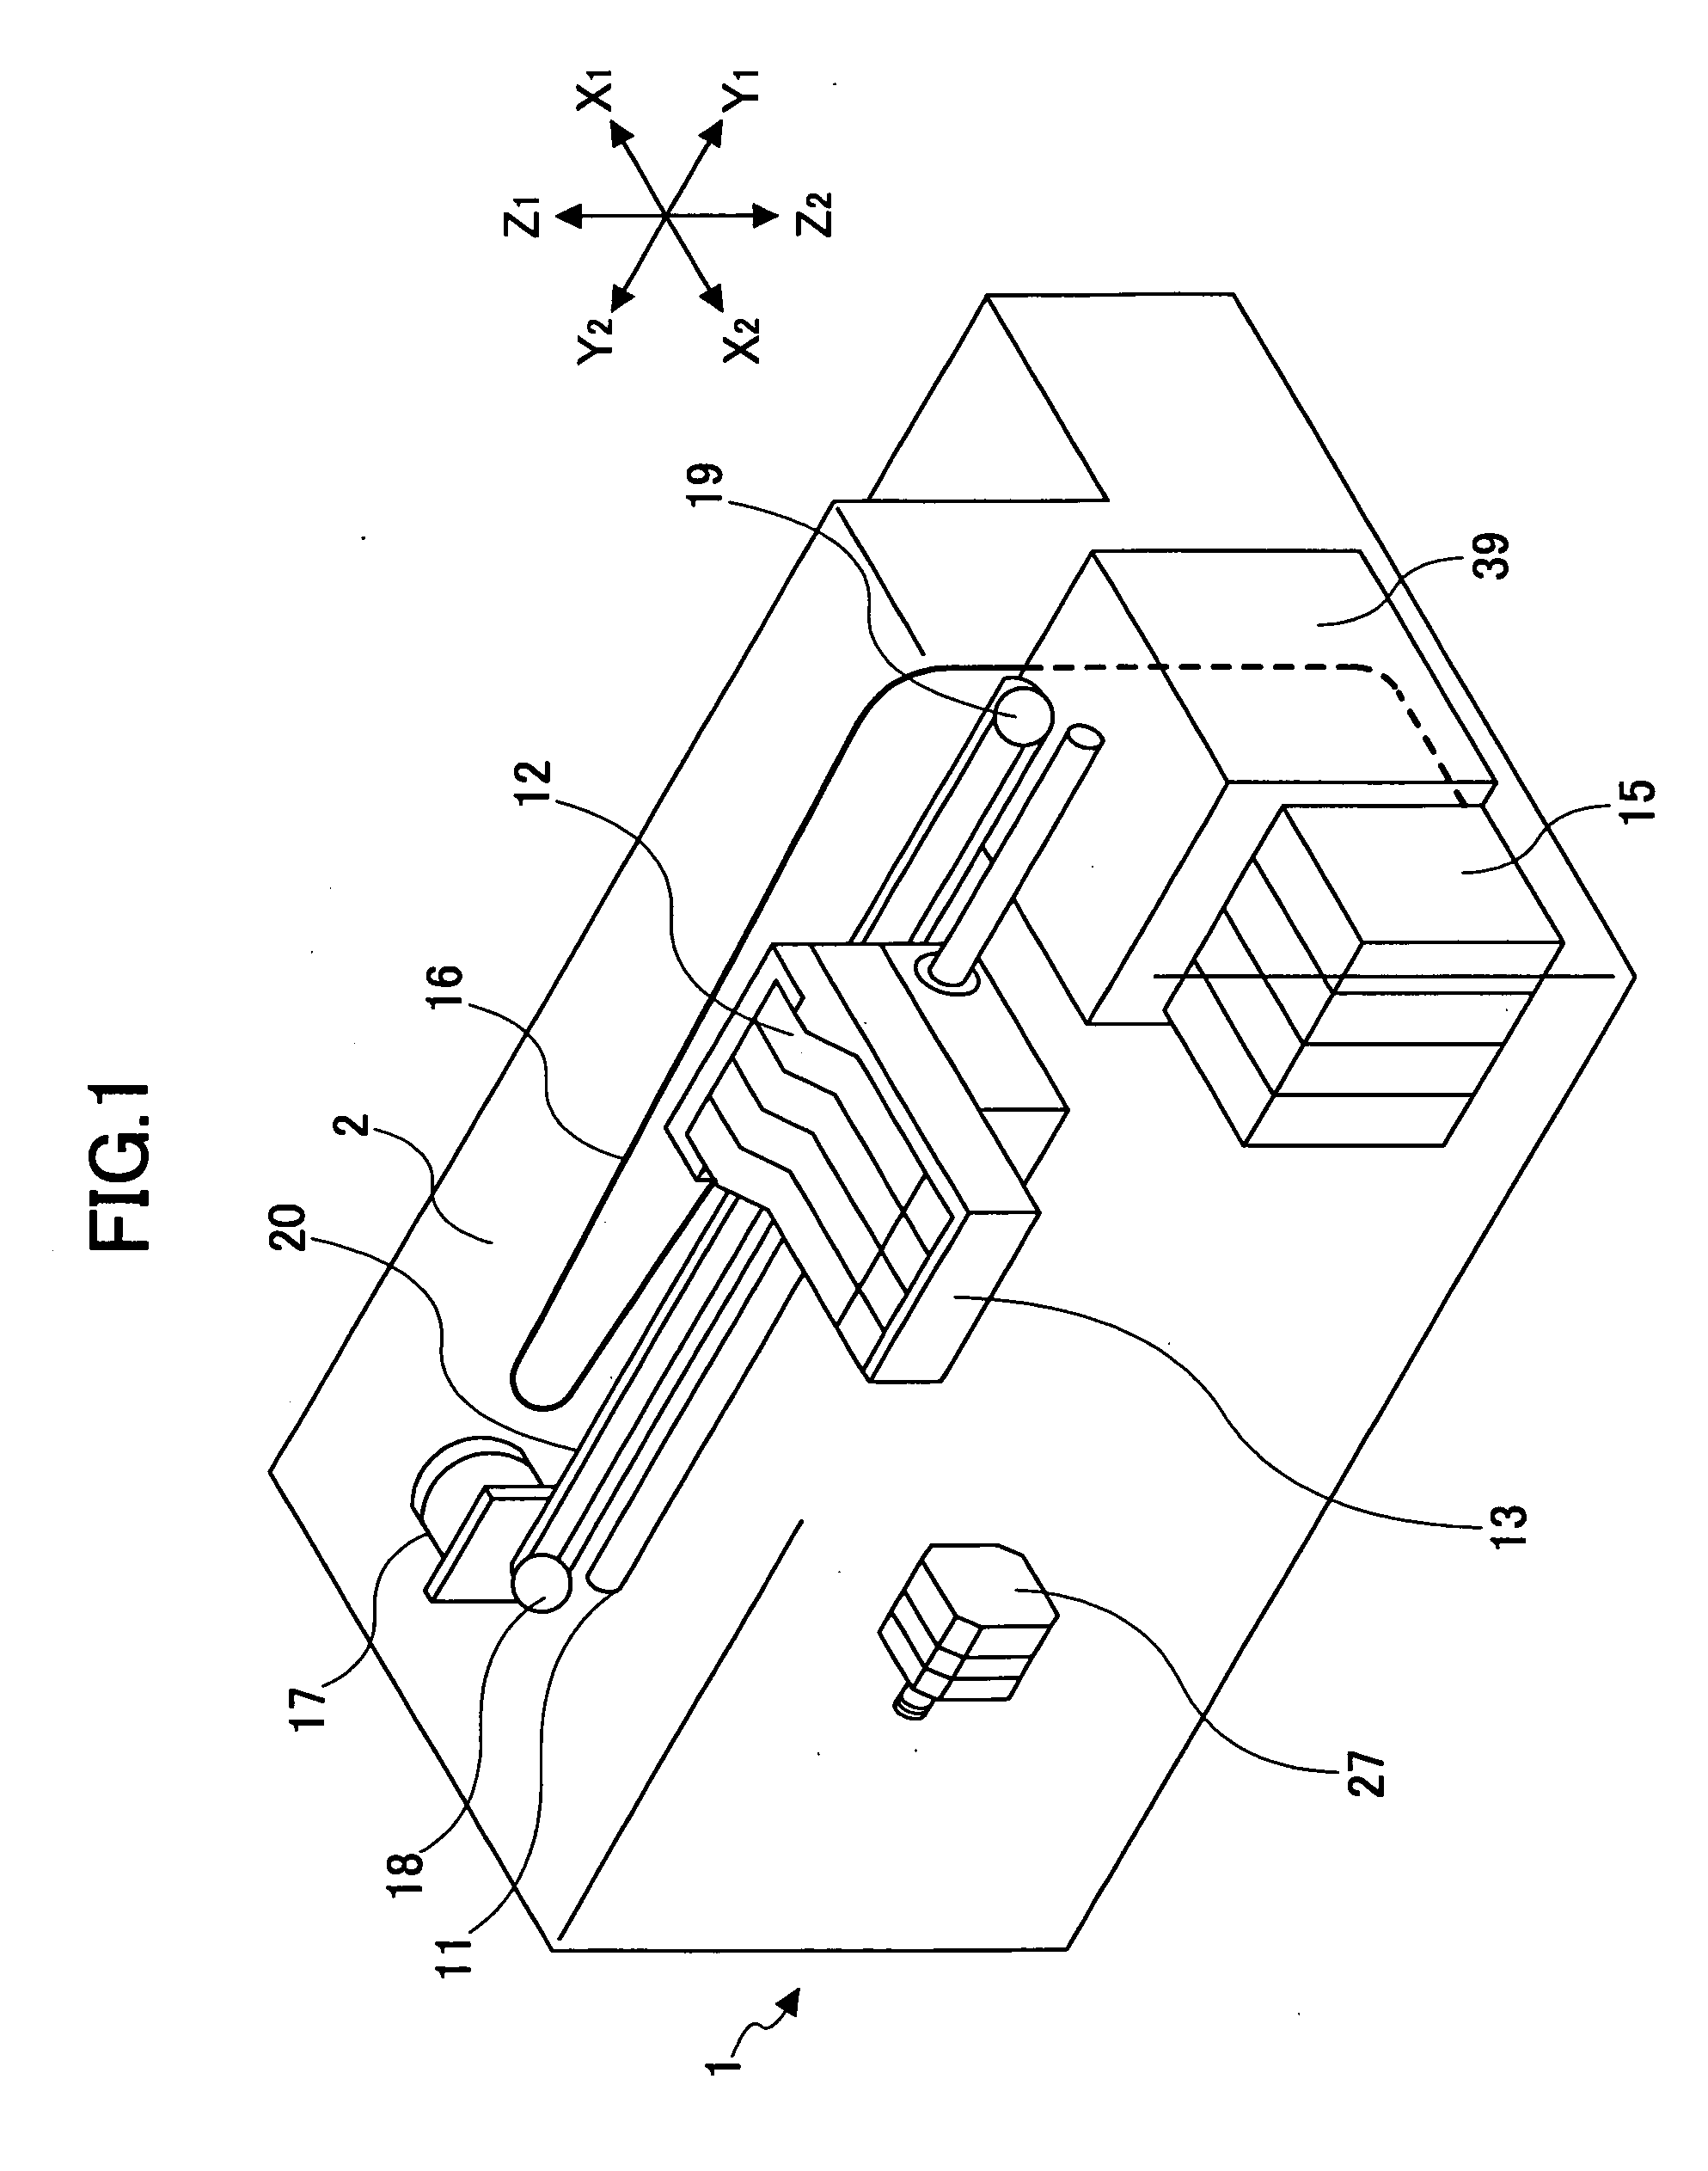 Inkjet carriage unit, inkjet recording apparatus, and image forming apparatus